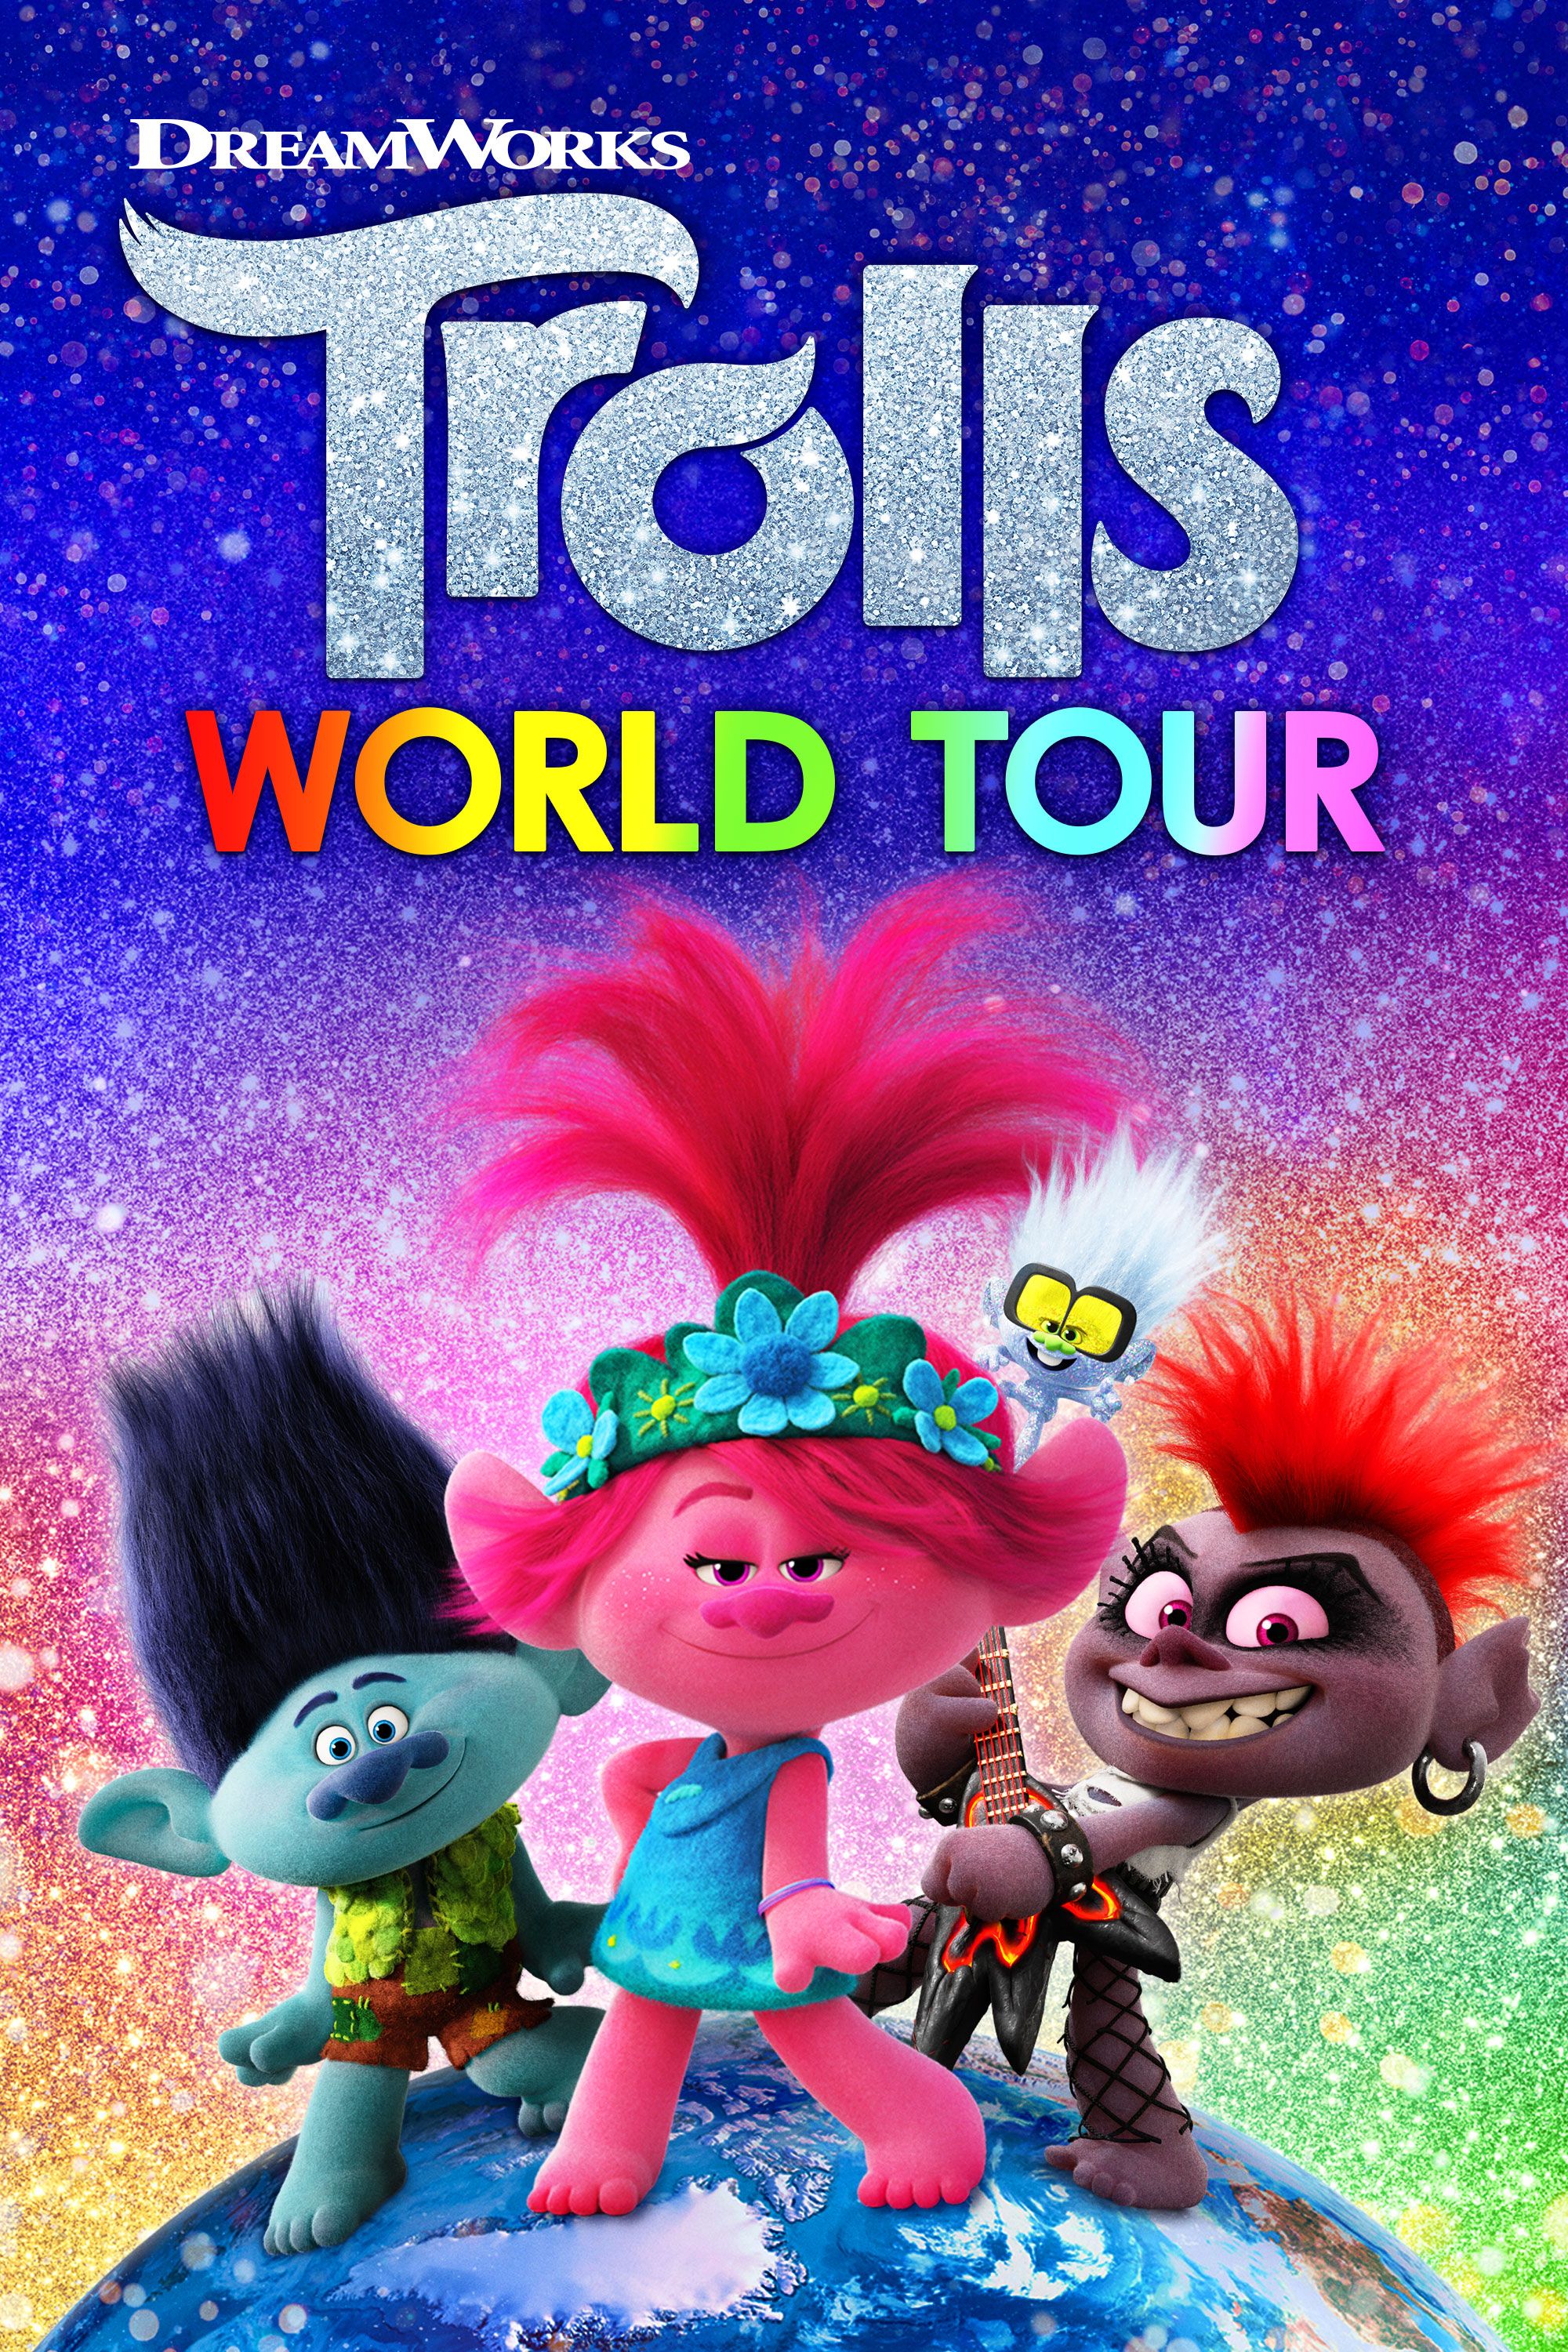 Movie poster for Trolls: world tour 